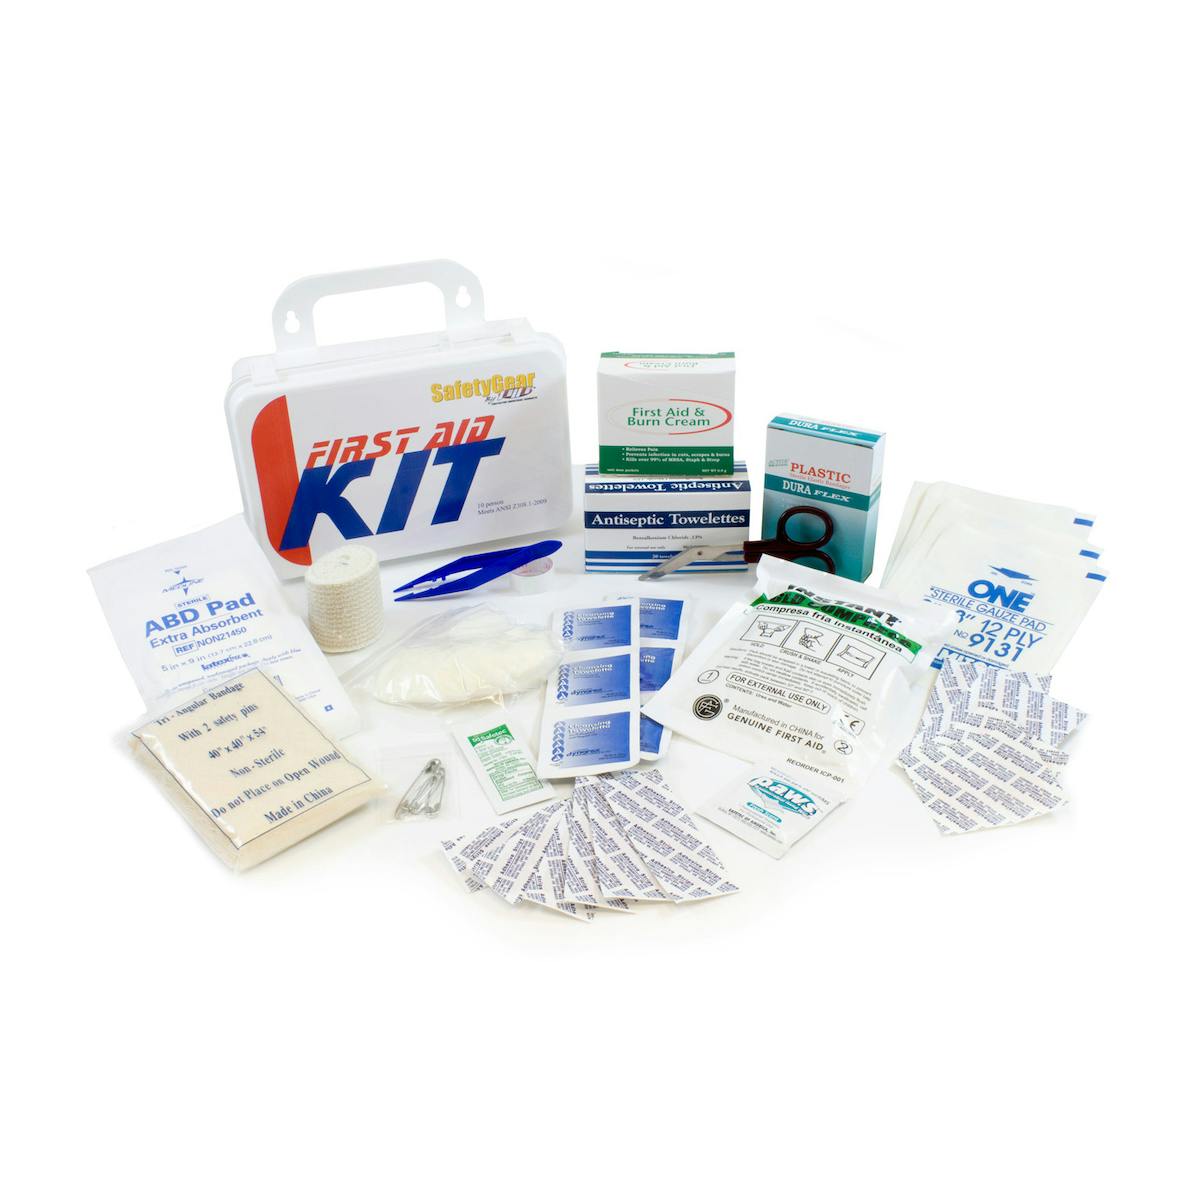 Personal First Aid Kit - 10 Person, White (299-13210) - KIT